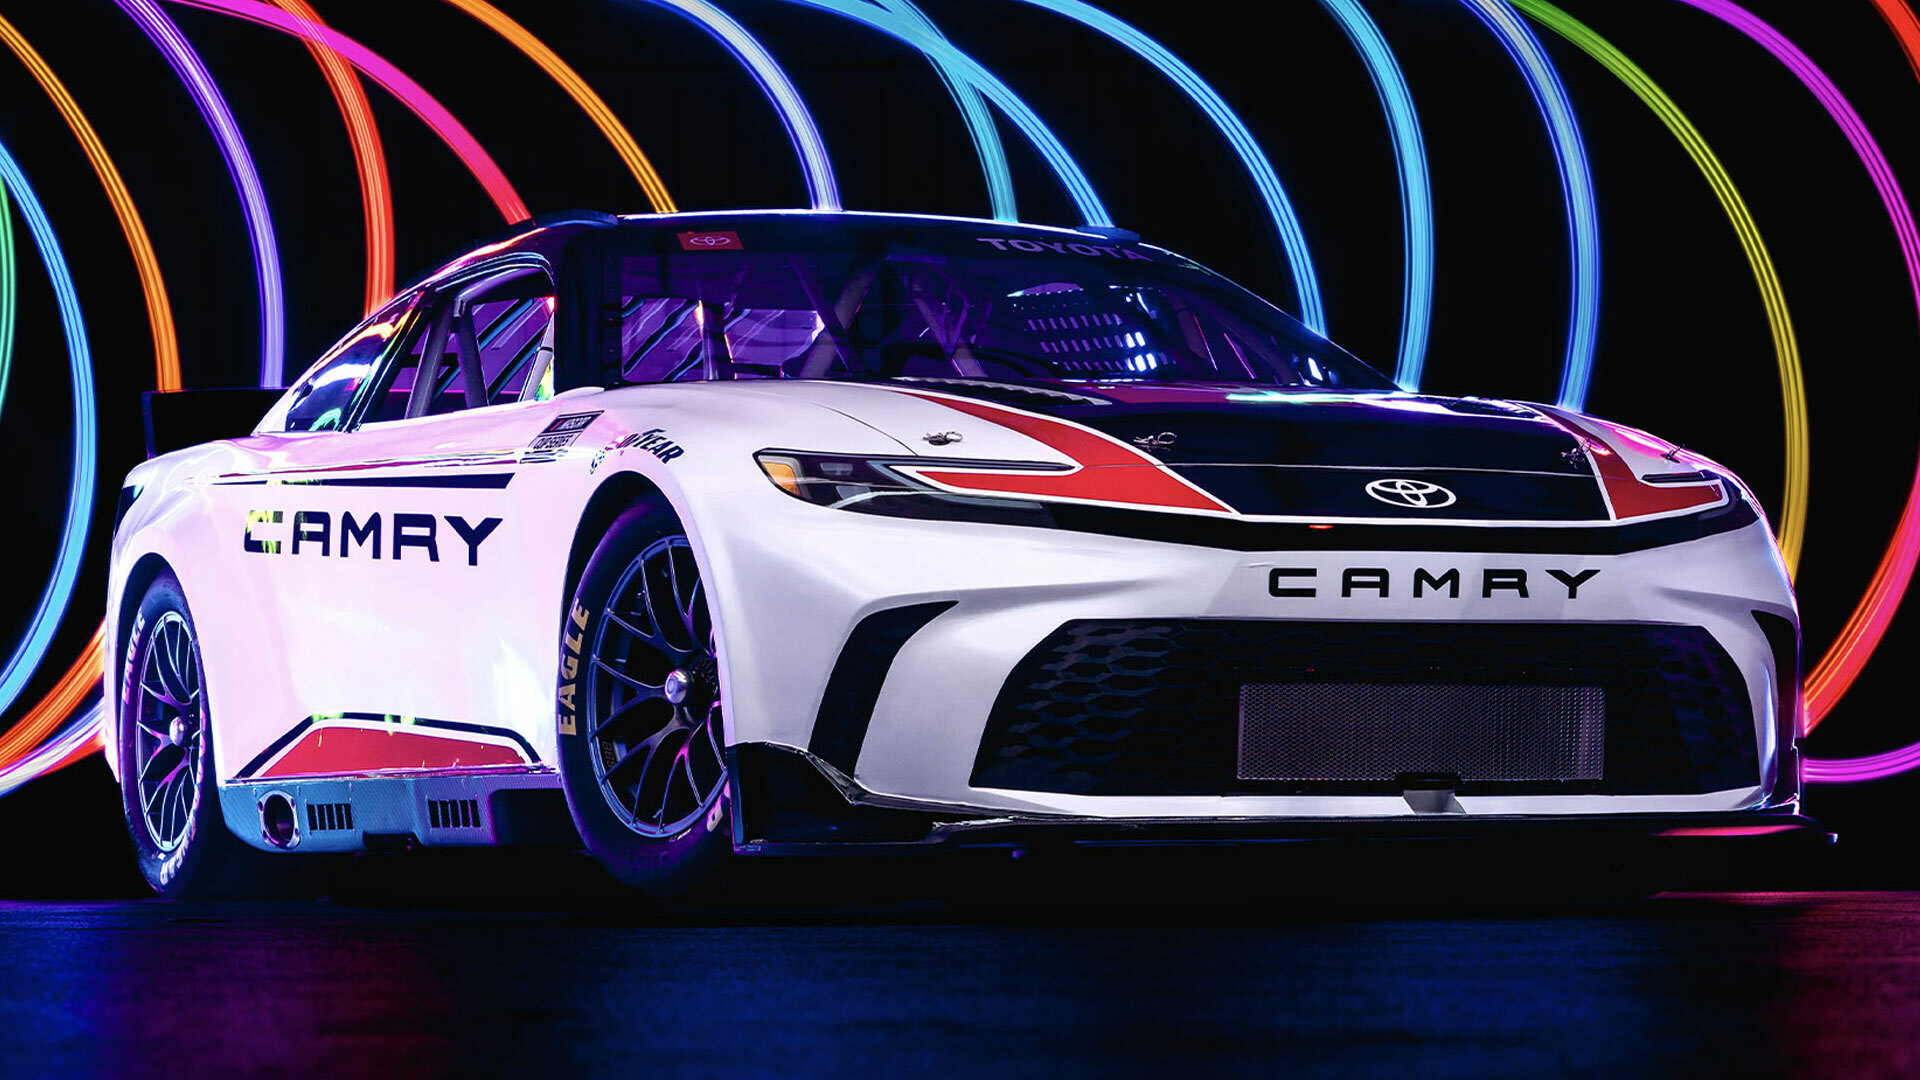 New Toyota Camry Unveiled For NASCAR Cup Series, Resembles Updated